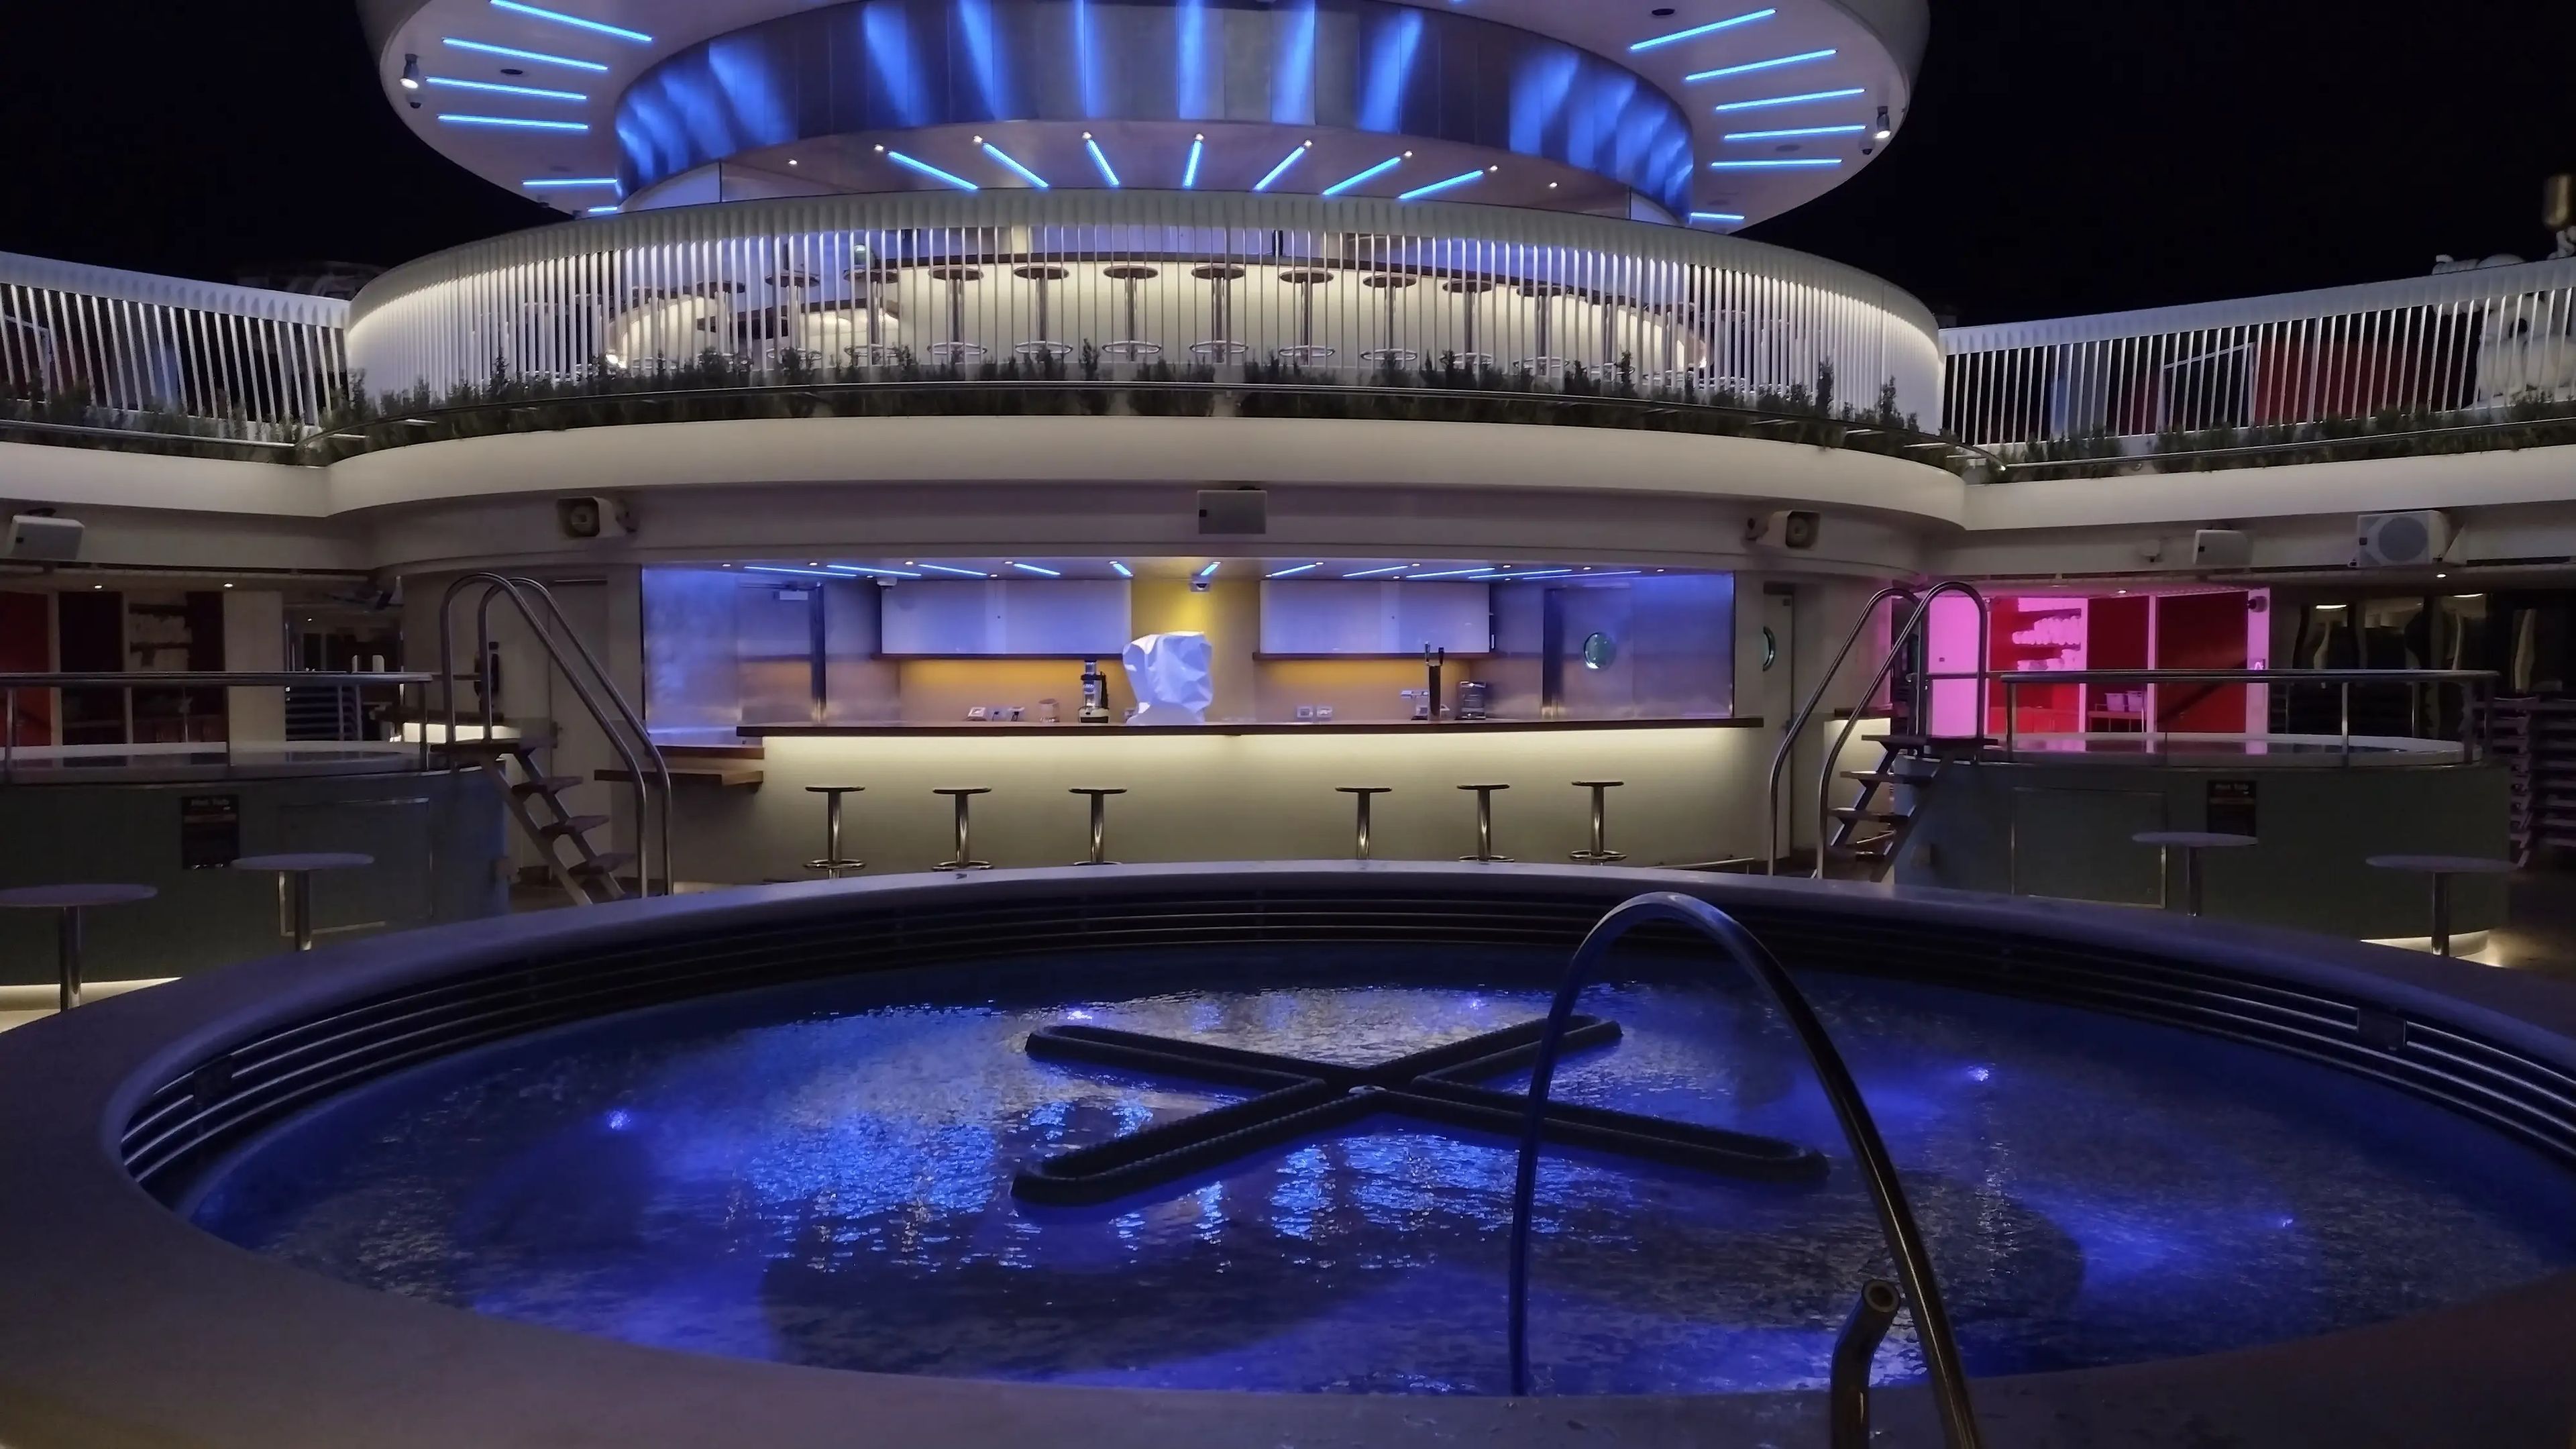 A cruise ship pool lit up at night with purple lights.